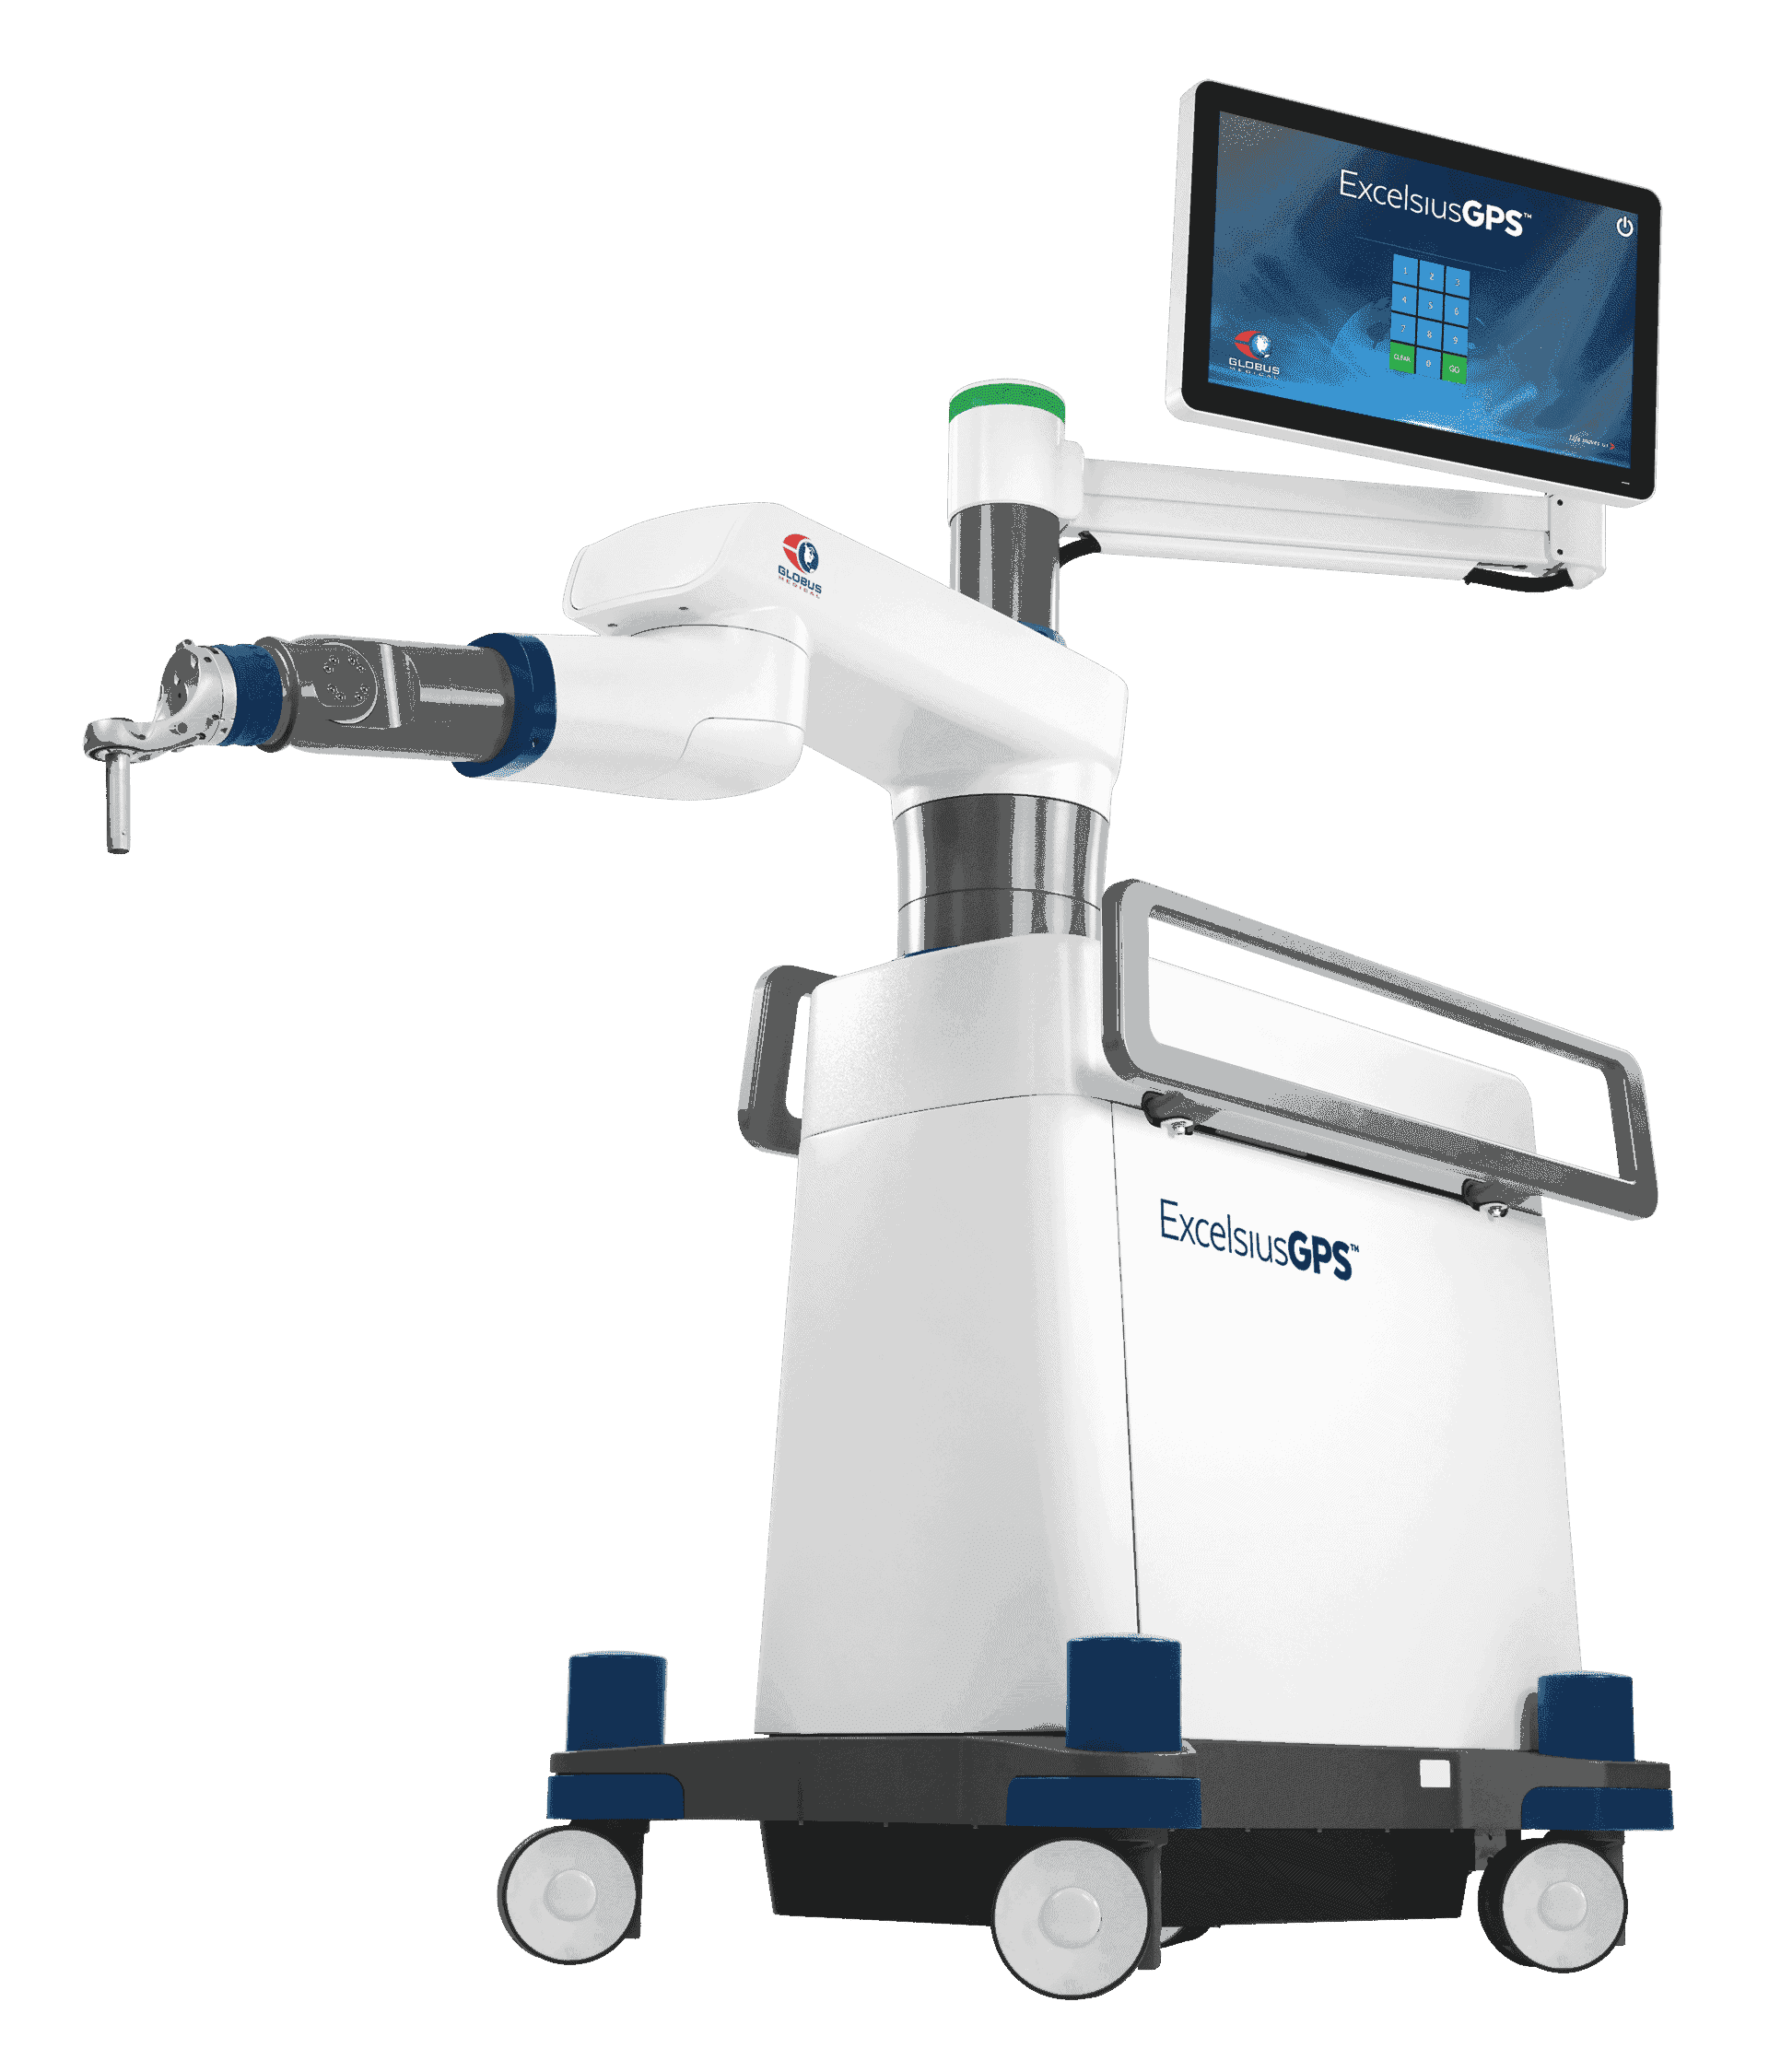 The Excelsius GPS® spine robot